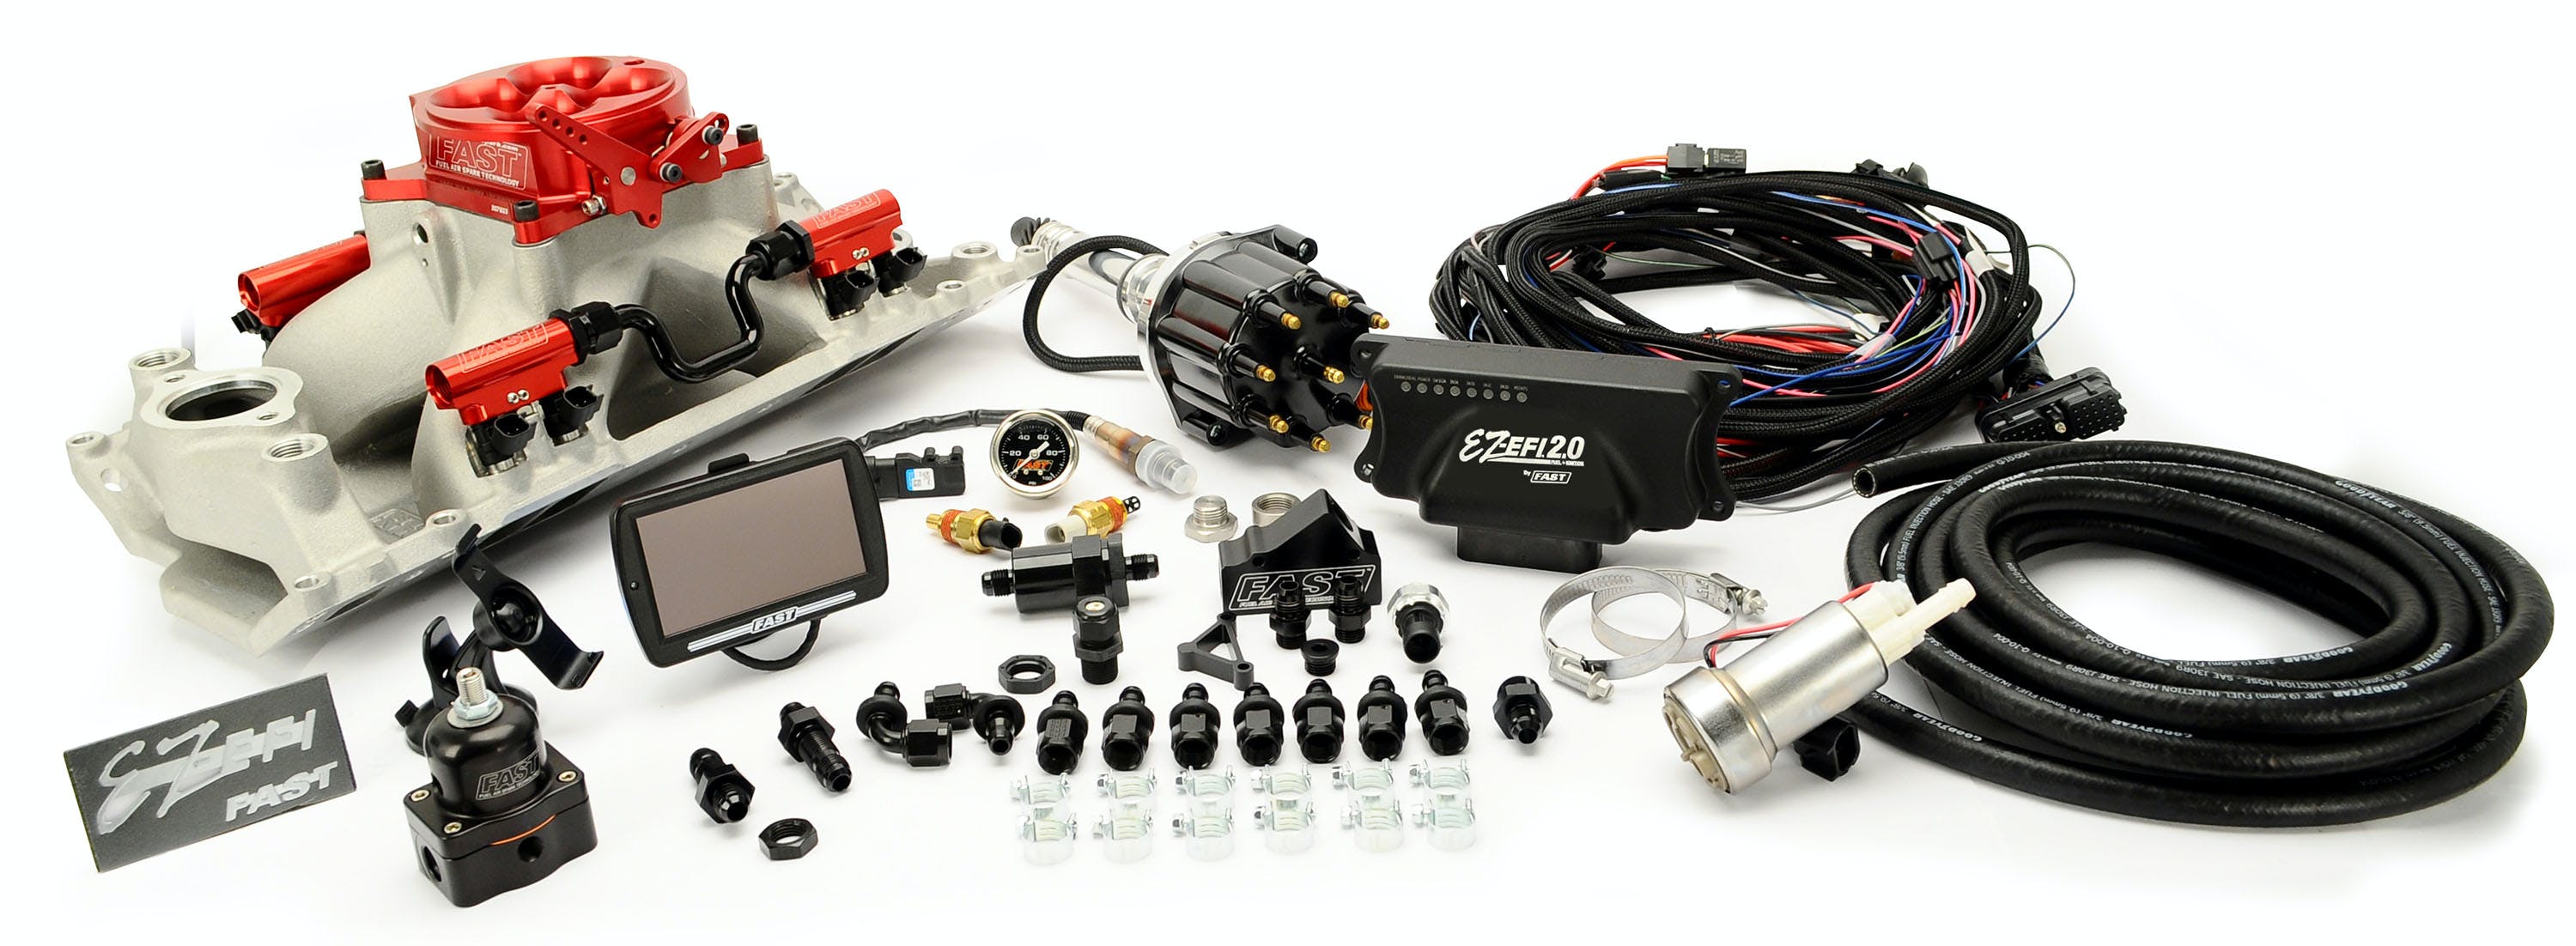 FAST - Fuel Air Spark Technology 30411-05L EZ 2.0 BBC Multiport w/intake, rails, throttle body, distributor and fuel pump